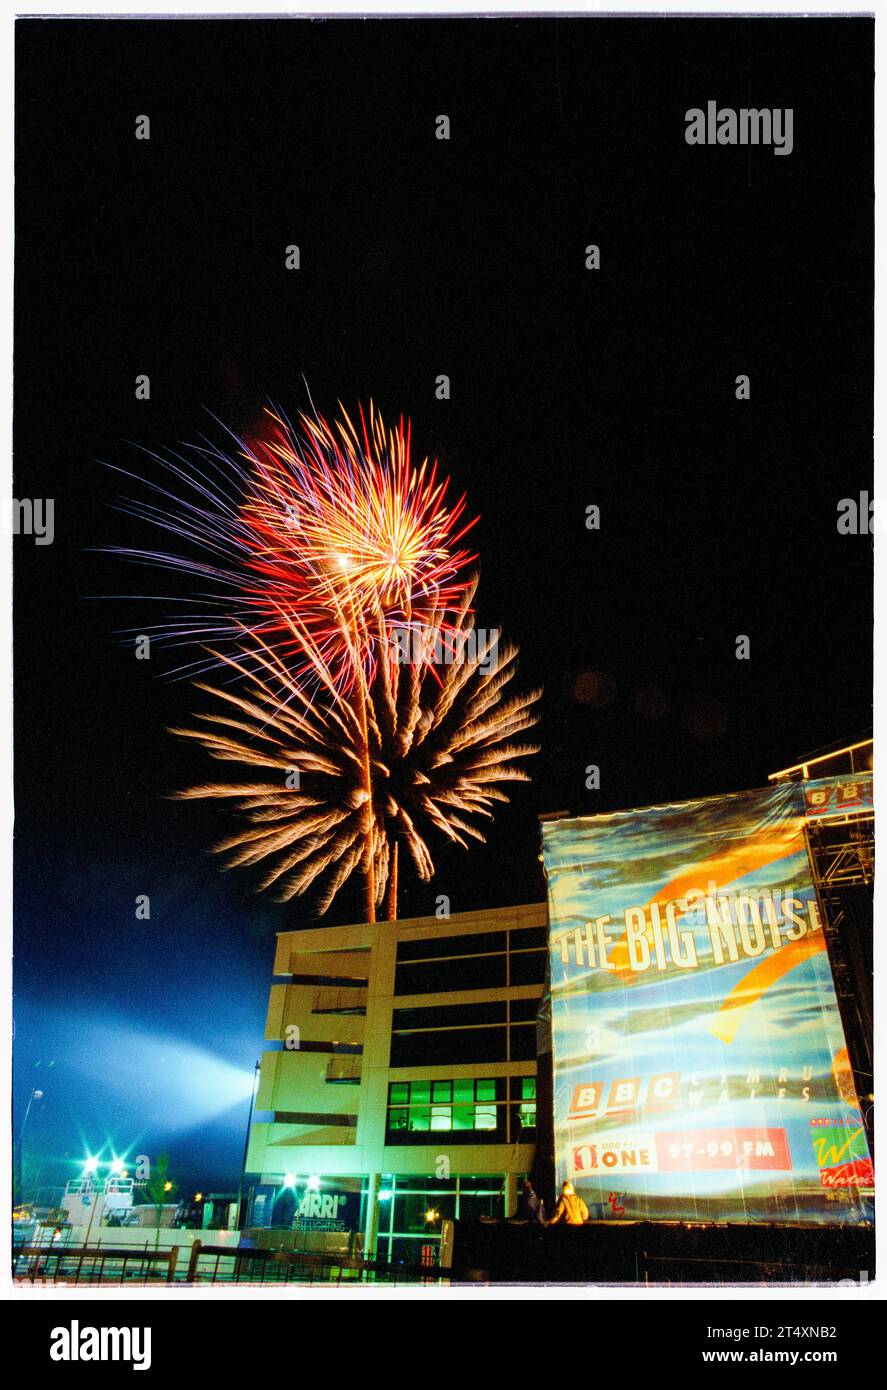 FIREWORKS, CARDIFF, BIG NOISE, 1997: The fireworks display at the climax of the BBC Big Noise Festival in Cardiff Bay, Cardiff, Wales, UK on Sunday, May 11, 1997. Photo: Rob Watkins Stock Photo